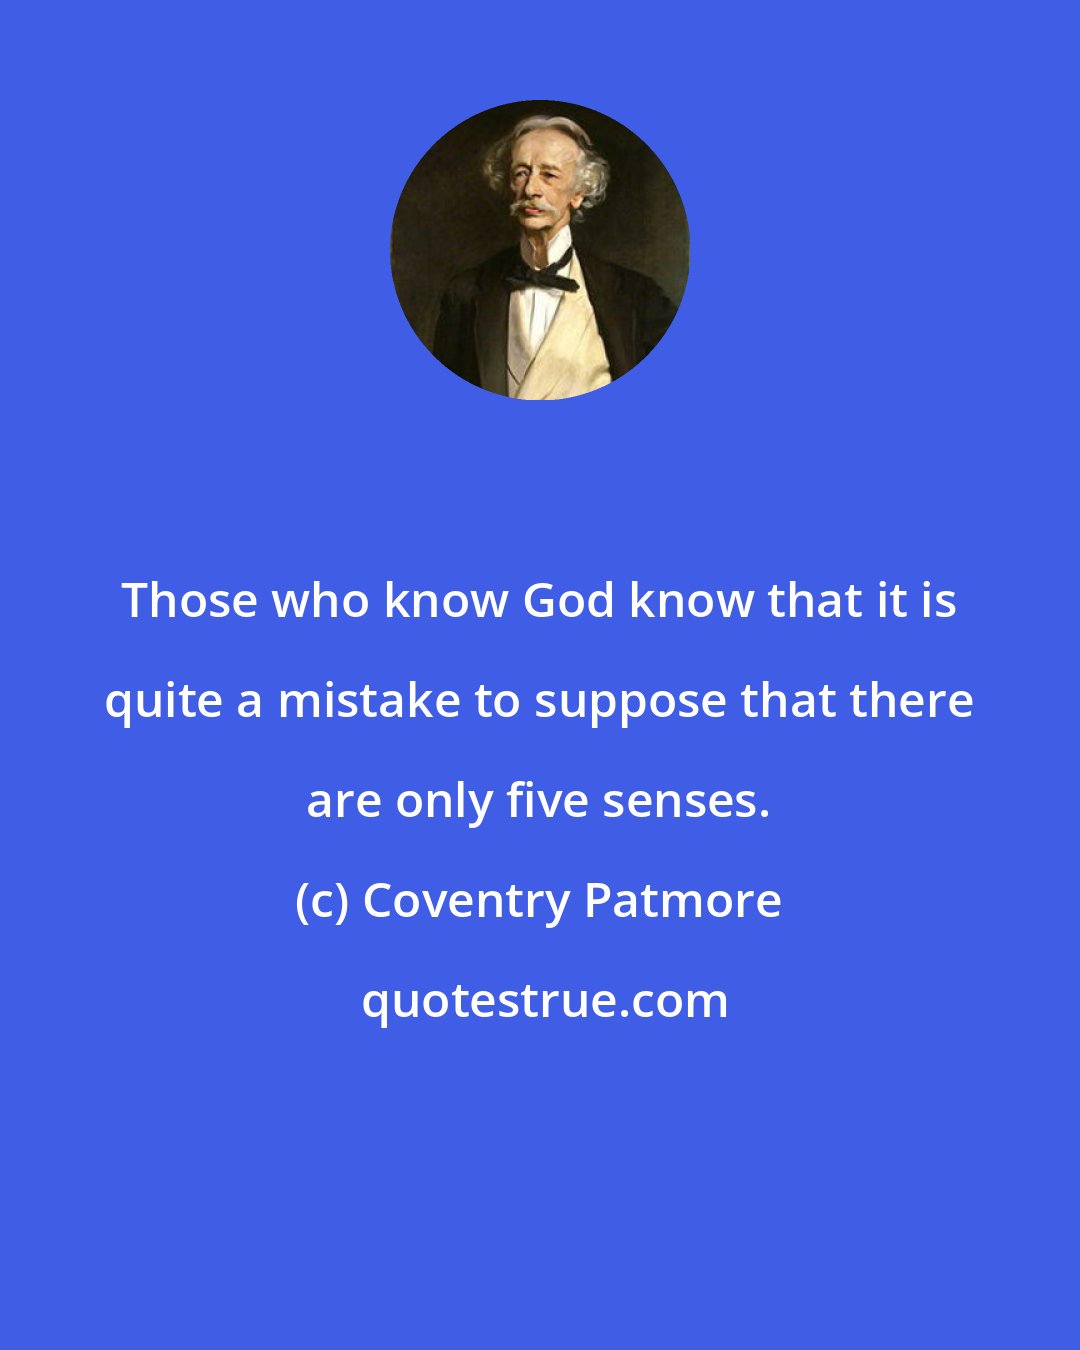 Coventry Patmore: Those who know God know that it is quite a mistake to suppose that there are only five senses.